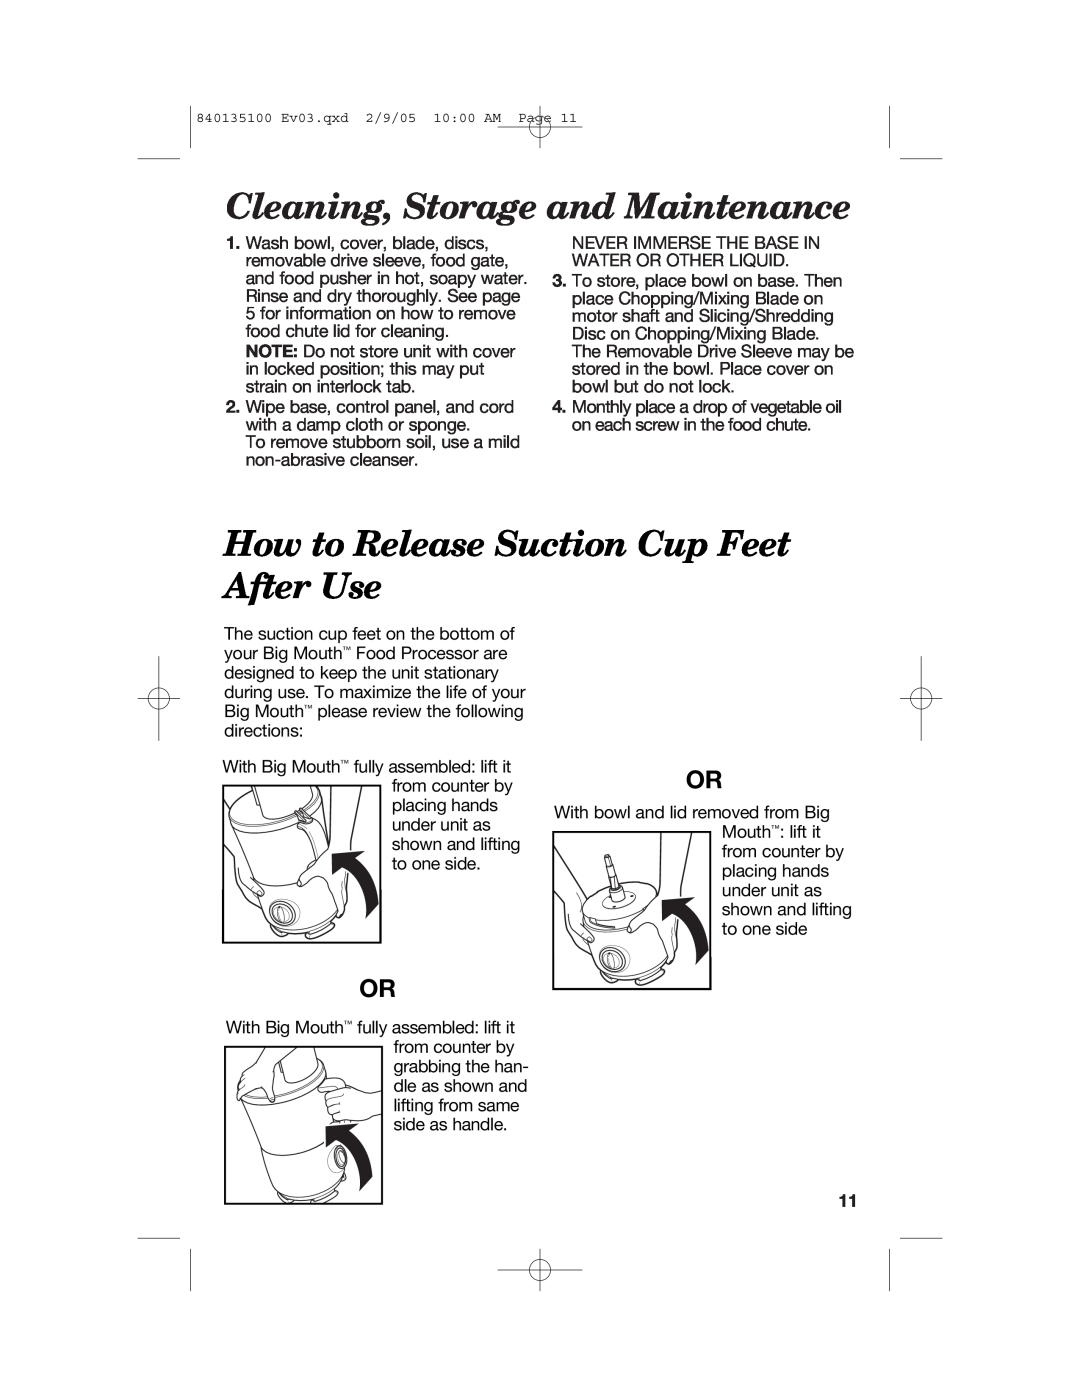 Hamilton Beach 840135100 manual Cleaning, Storage and Maintenance, How to Release Suction Cup Feet After Use 